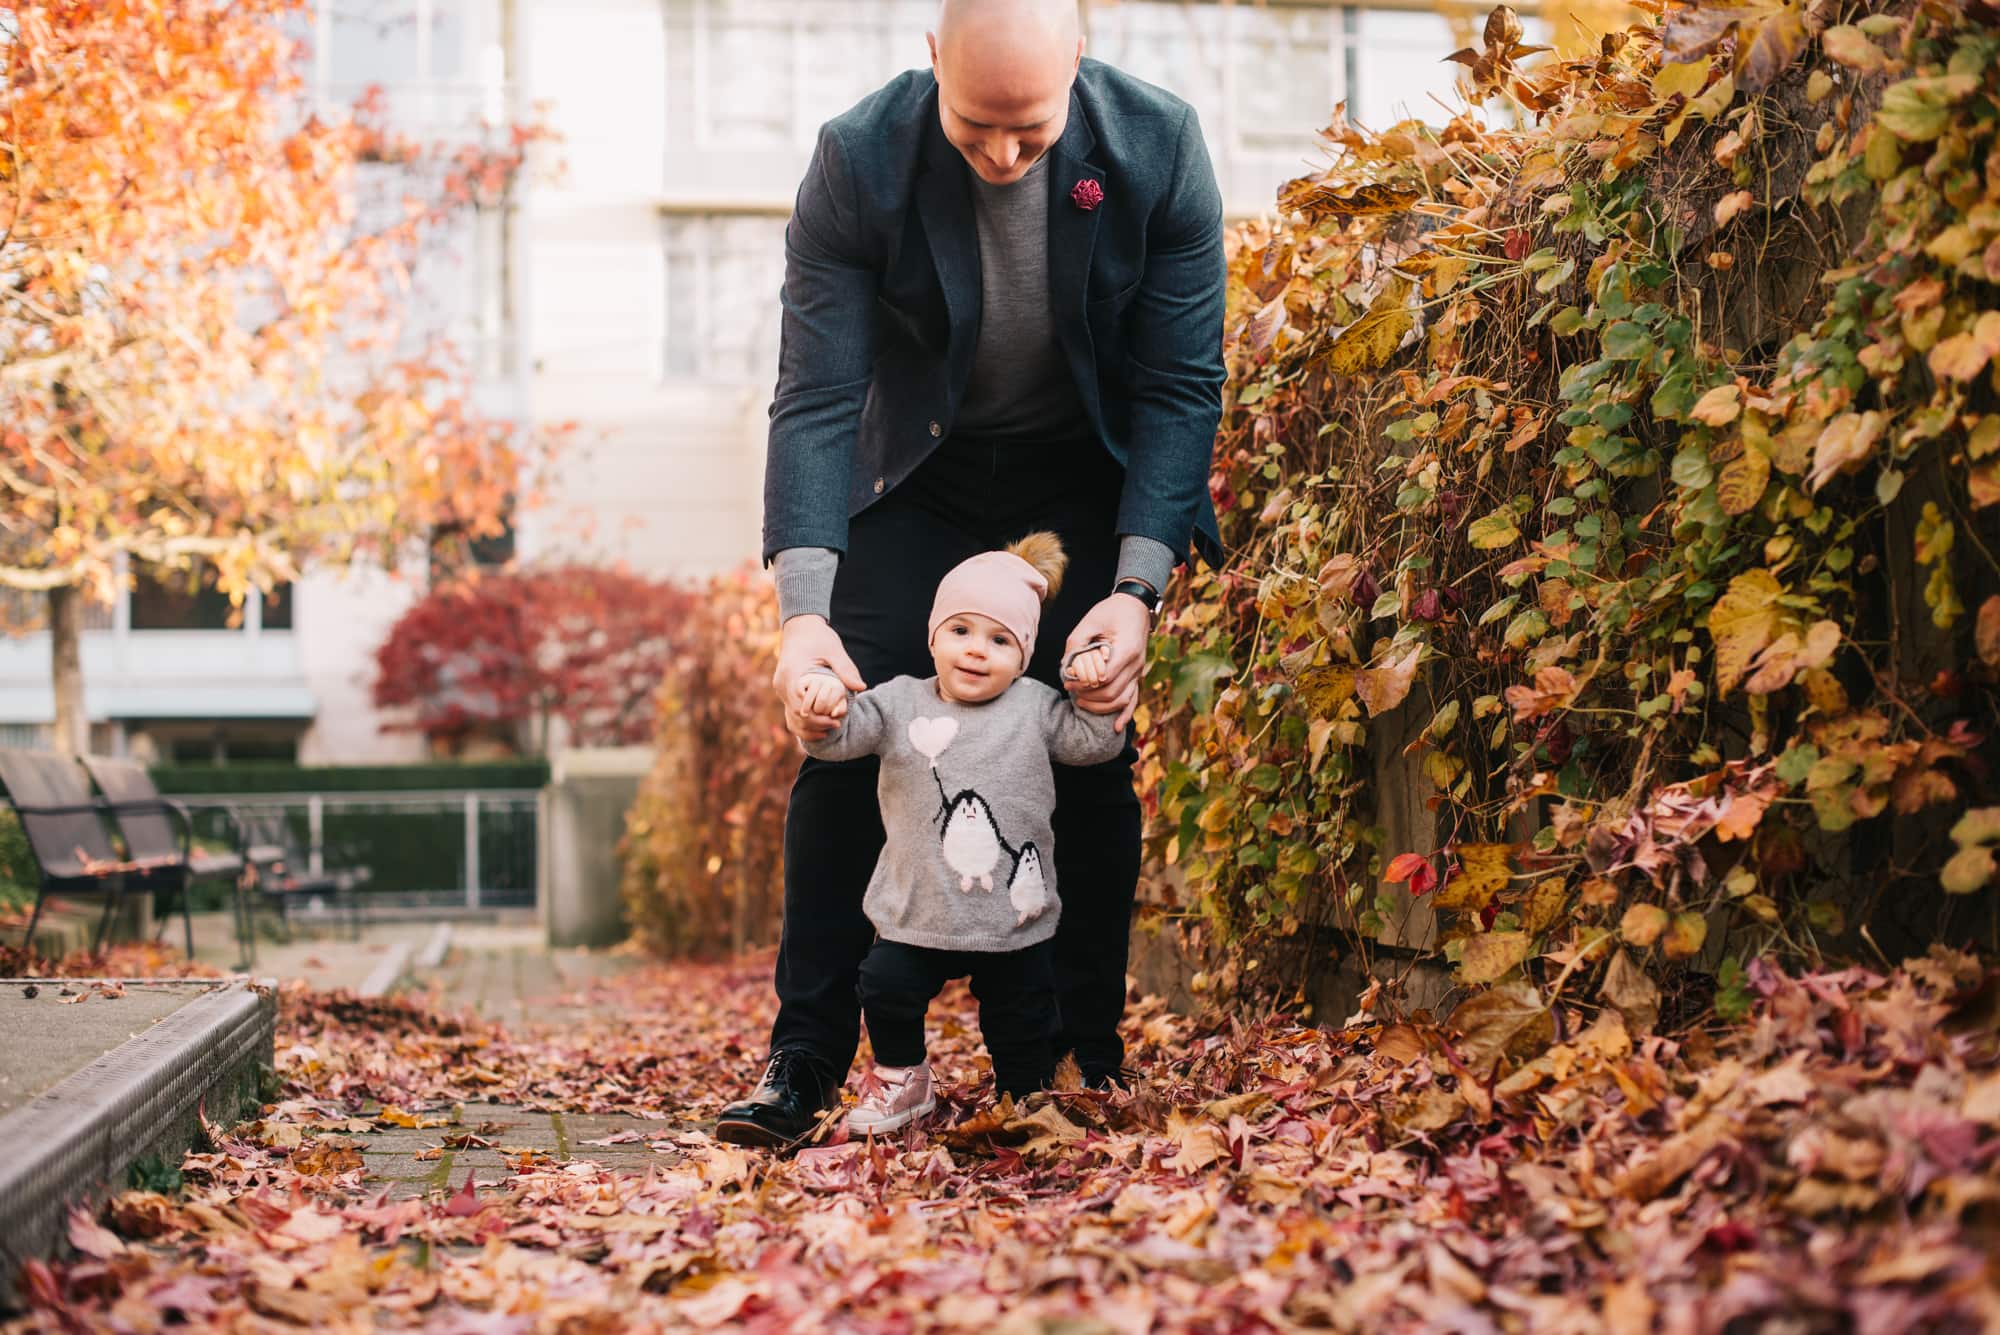 This Vancouver fall family photography session shows dad walking with his daughter on a chilly autumn day.